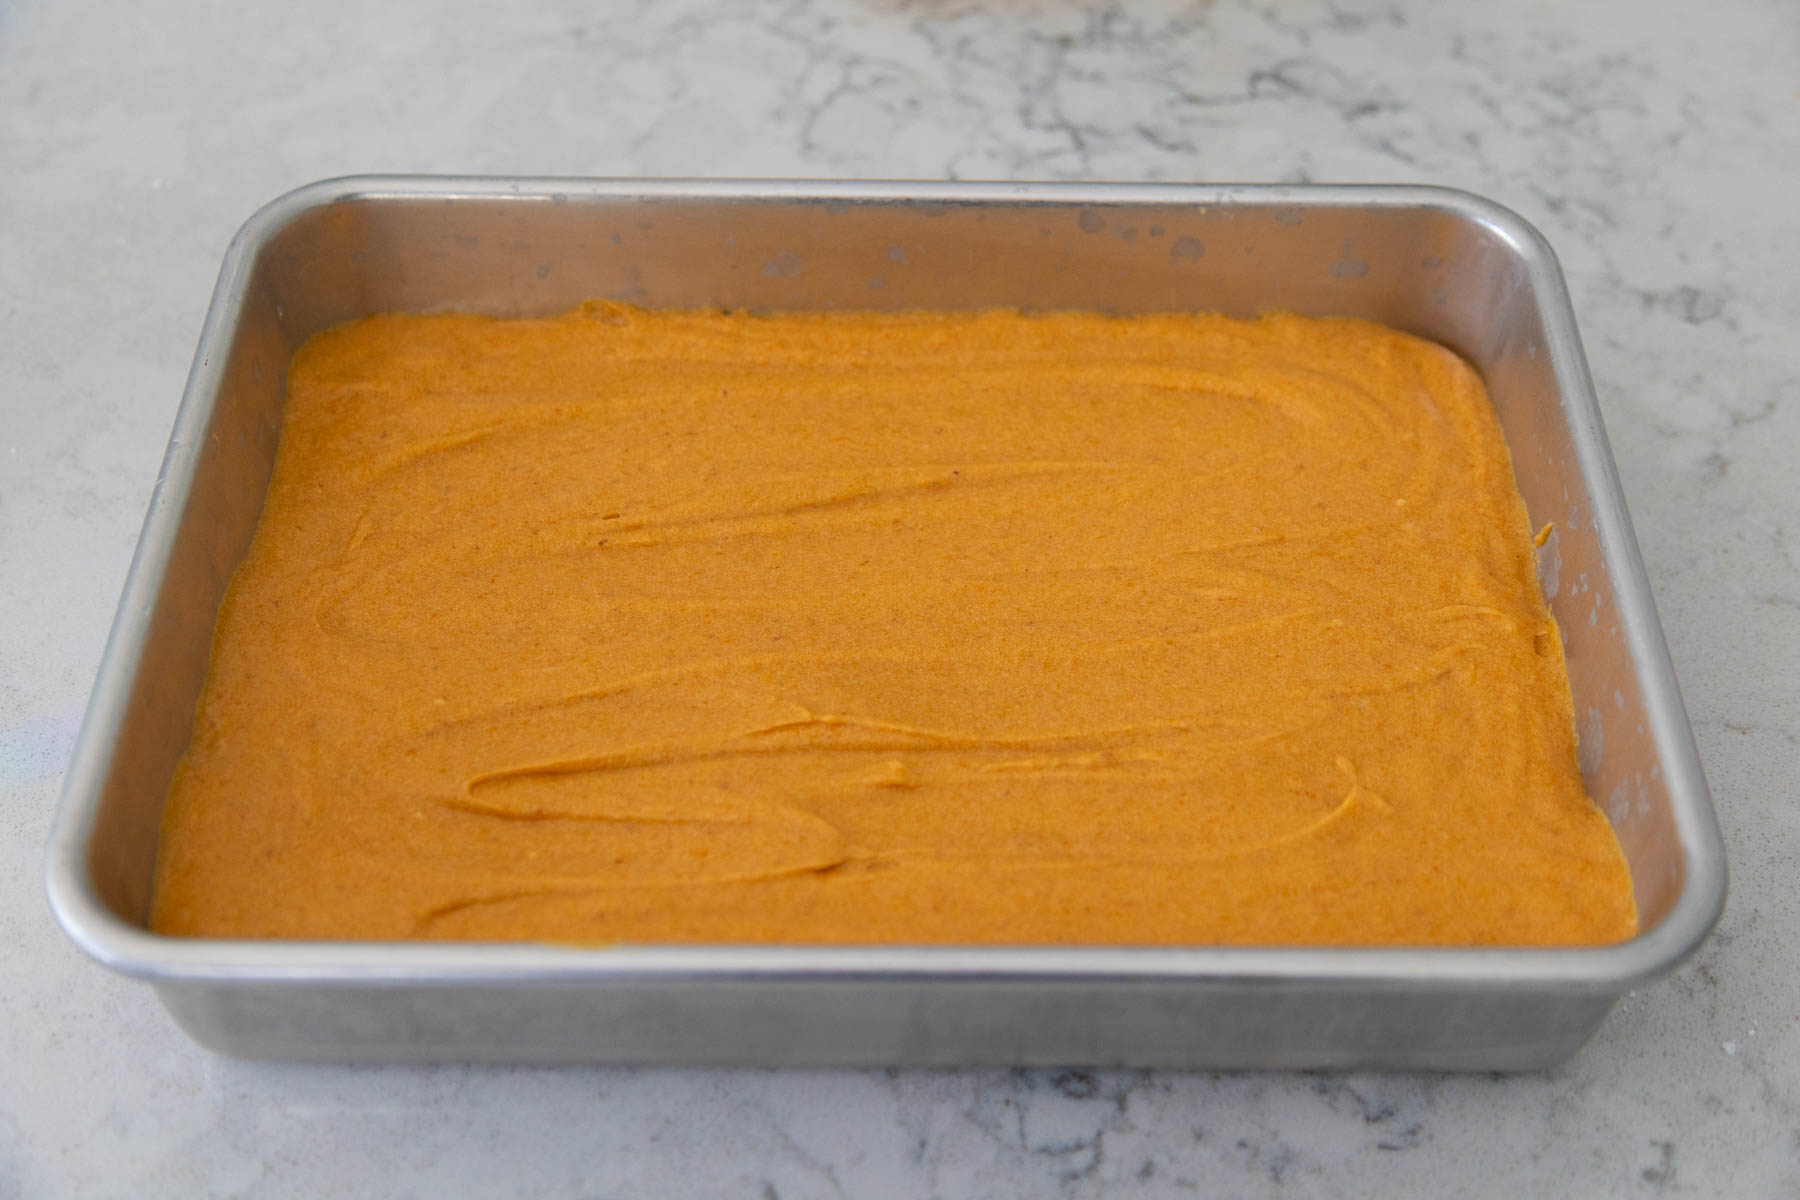 The pumpkin filling has been spread over the cake crust.